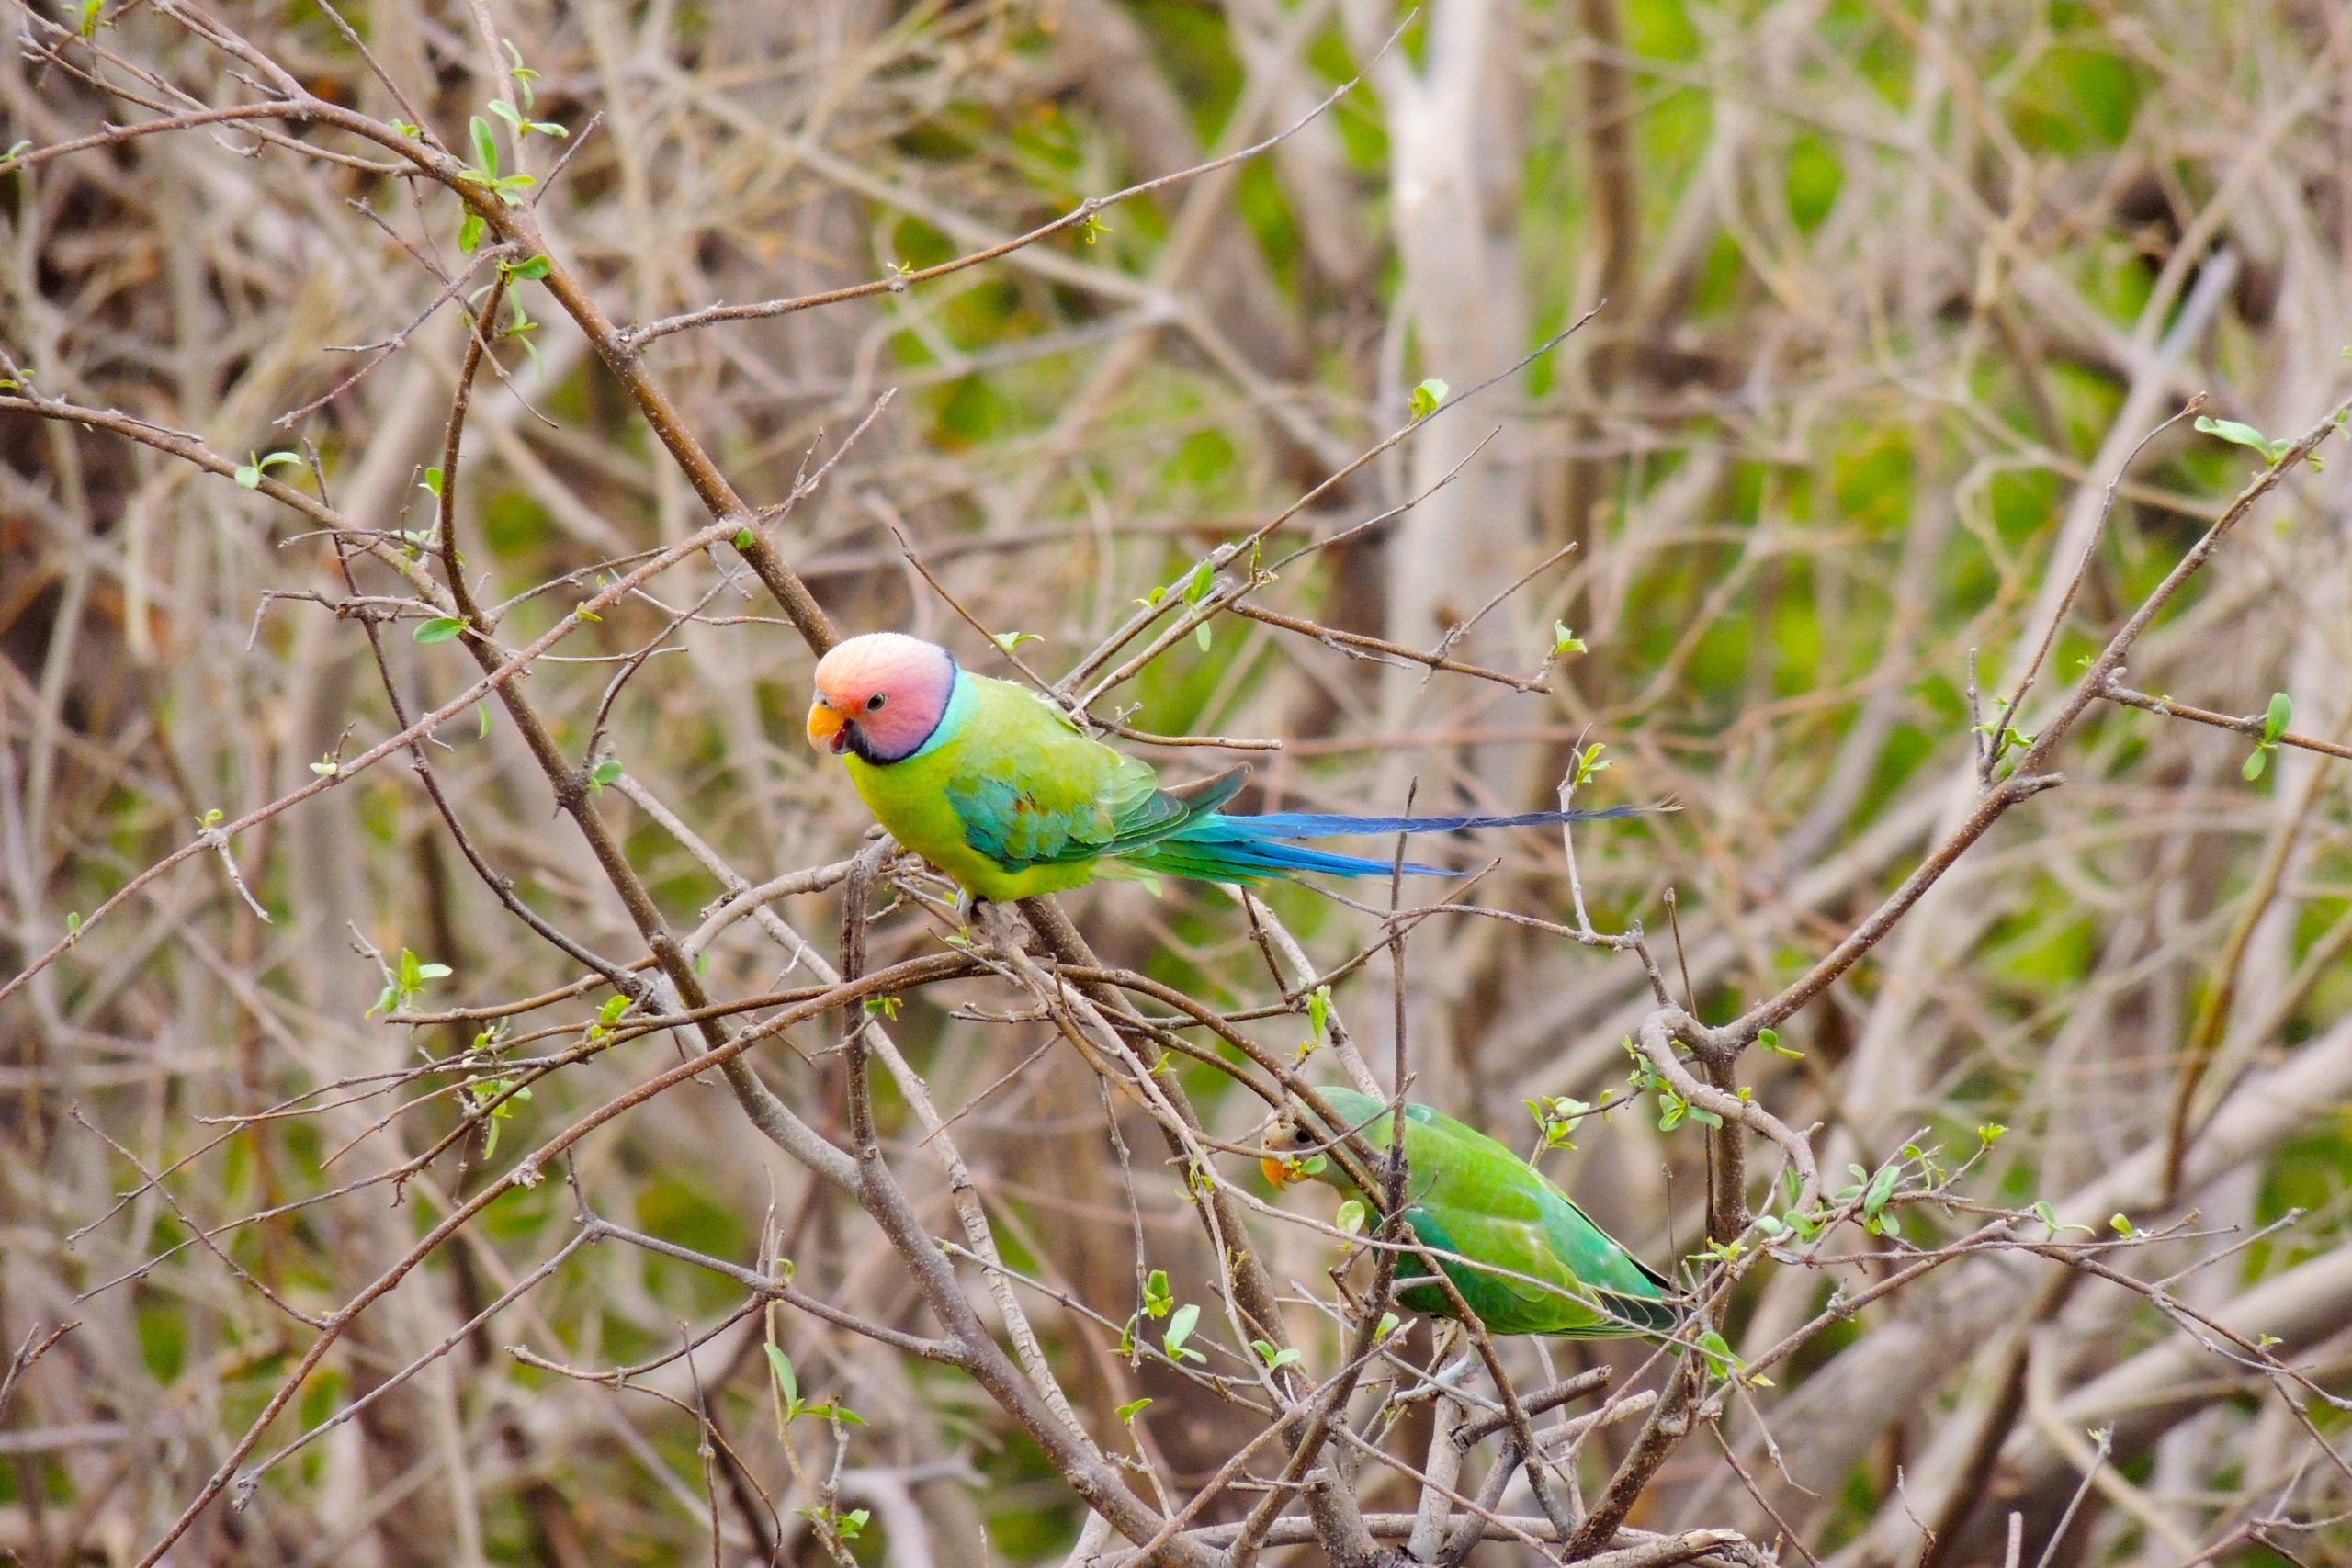 Parakeet perched on a tree